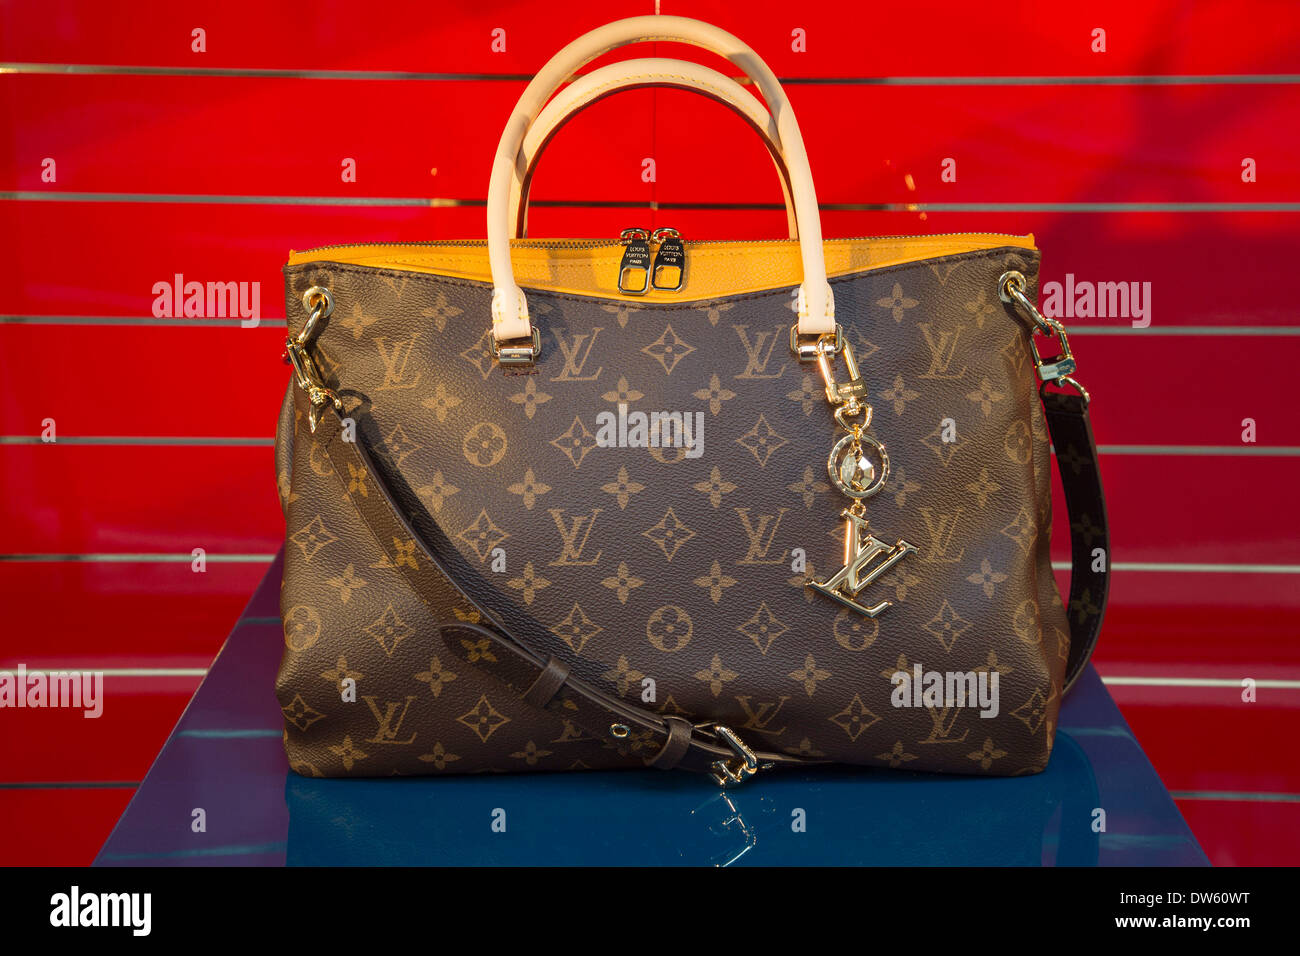 Bag In The Shop Window Of Louis Vuitton Store In London, Uk Stock Photo, Royalty Free Image ...